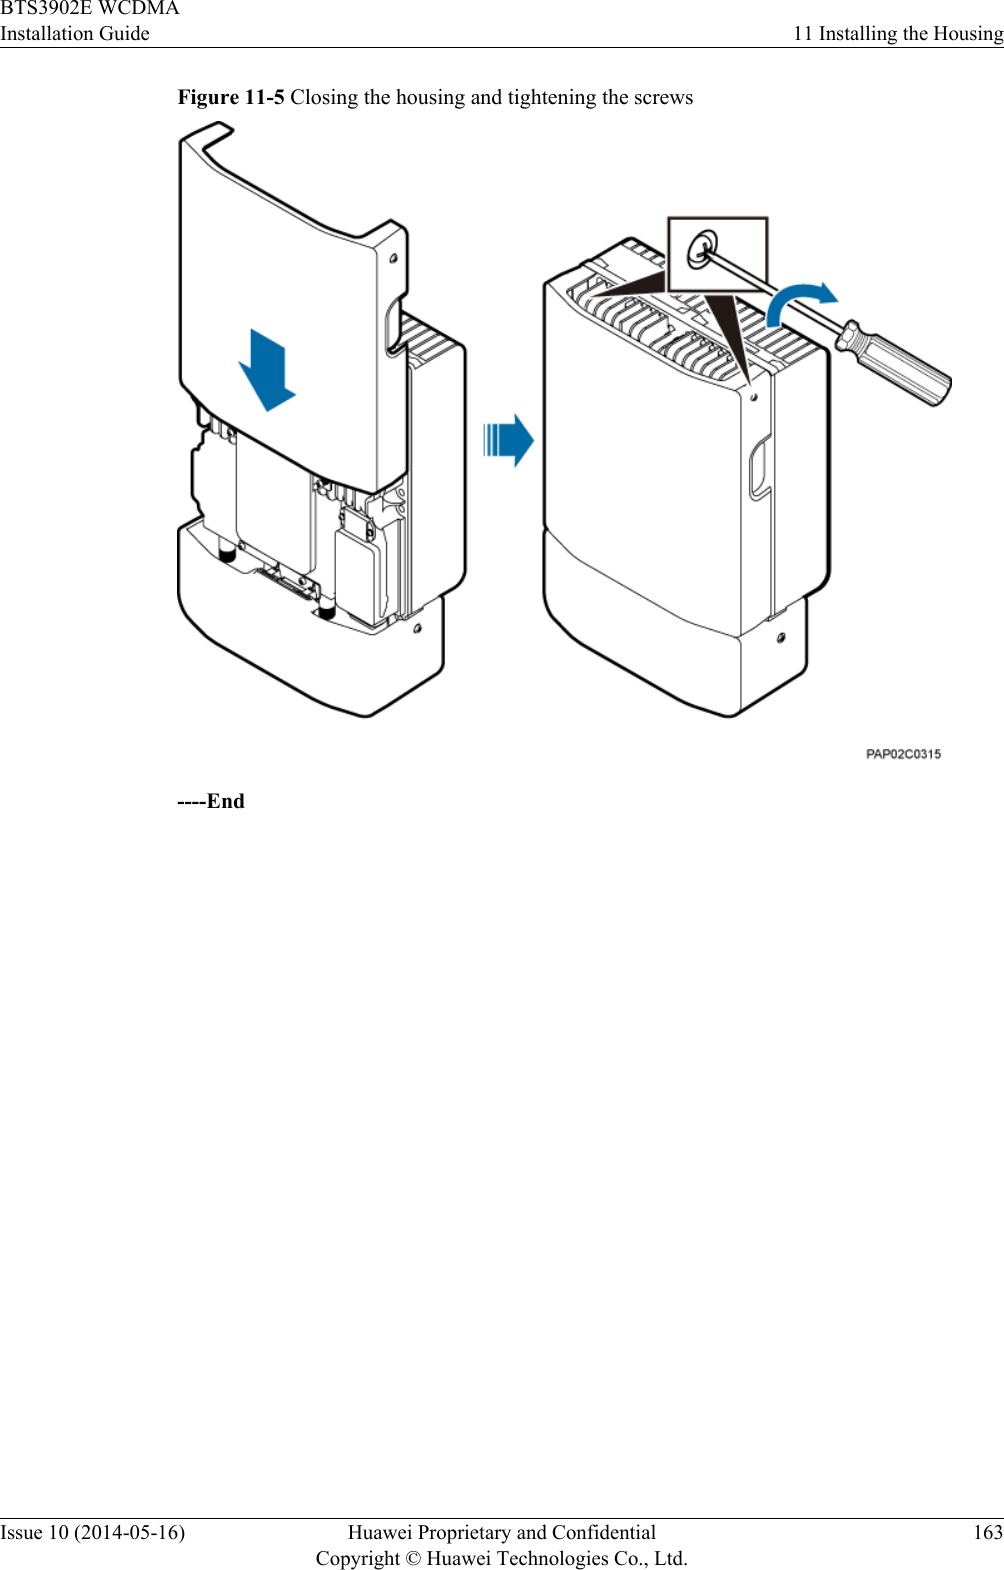 Figure 11-5 Closing the housing and tightening the screws----EndBTS3902E WCDMAInstallation Guide 11 Installing the HousingIssue 10 (2014-05-16) Huawei Proprietary and ConfidentialCopyright © Huawei Technologies Co., Ltd.163